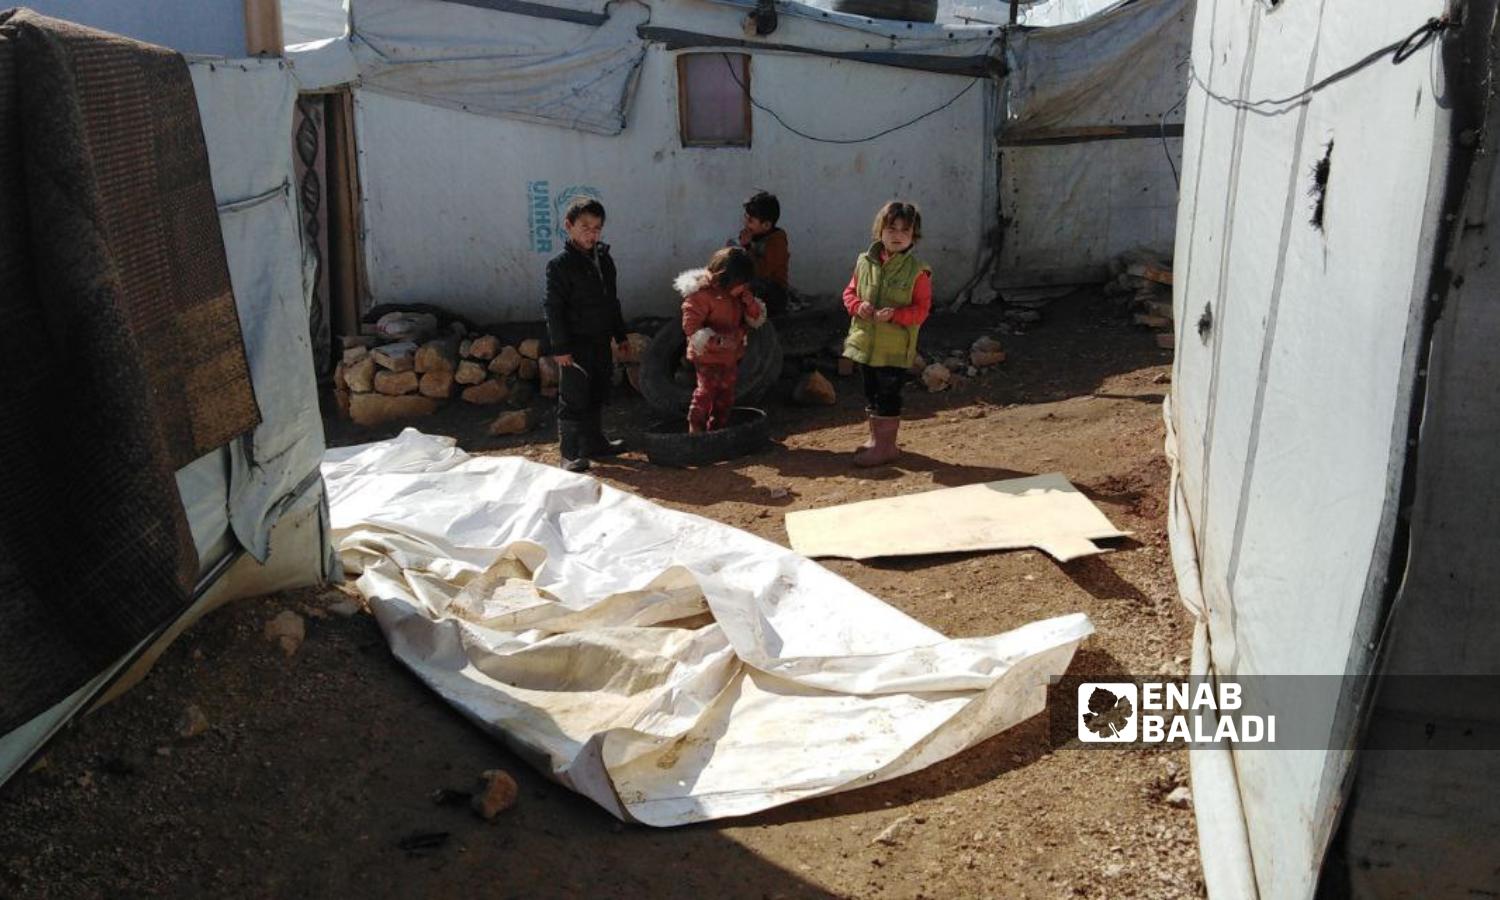 A group of Syrian children play in a camp for Syrian refugees in Arsal city, Lebanon - January 27, 2024 (Enab Baladi)
